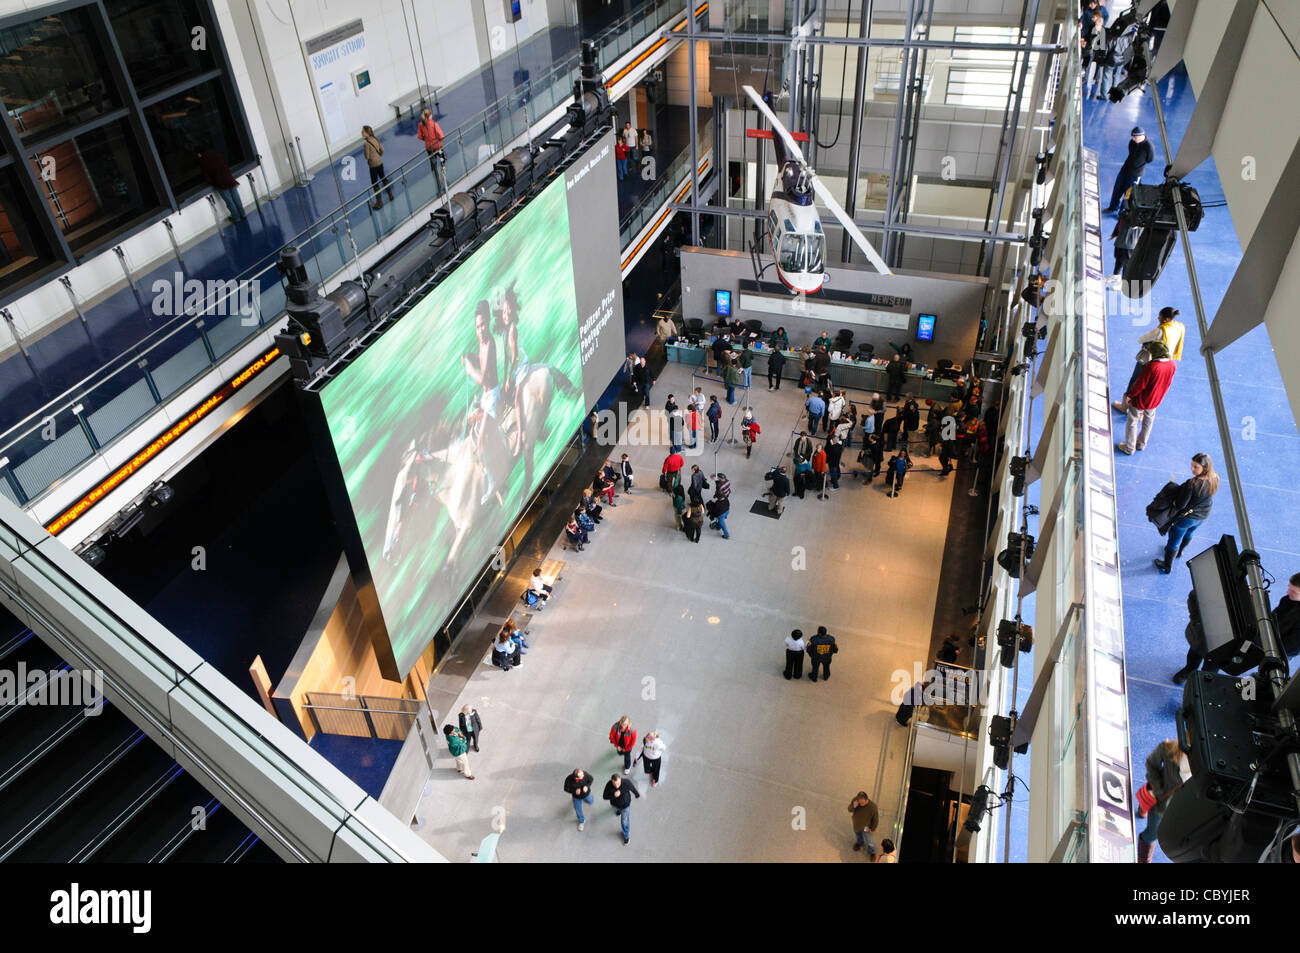 WASHINGTON DC, USA - The main hall of the Newseum. The Newseum is a 7-story, privately funded museum dedicated to journalism and news. It opened at its current location on Pennsylvania Avenue in April 2008. Stock Photo